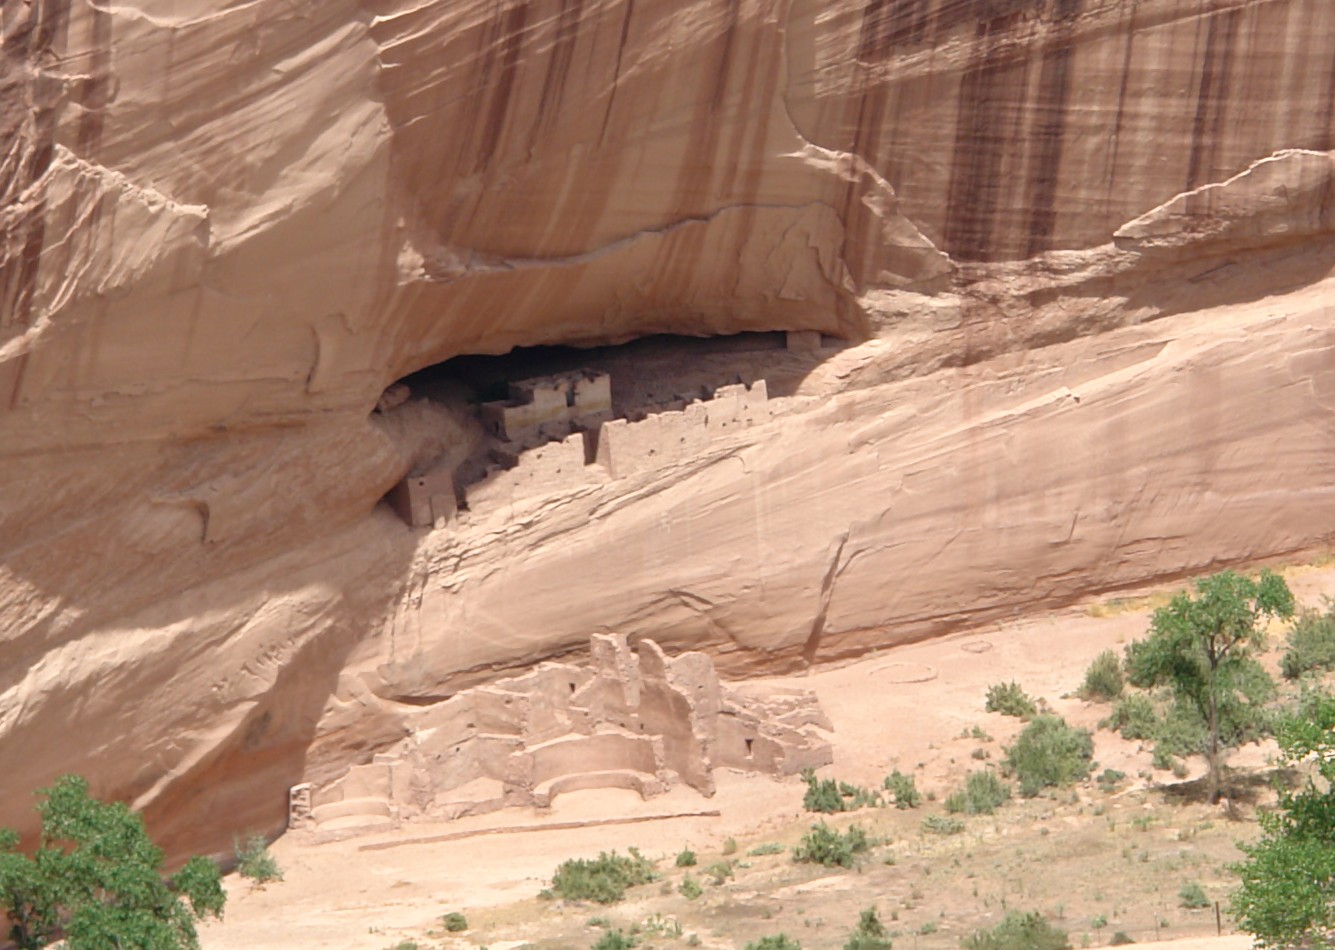 http://upload.wikimedia.org/wikipedia/commons/4/44/Canyon_de_Chelly_7-27-09_%2811_cropped%29.jpg